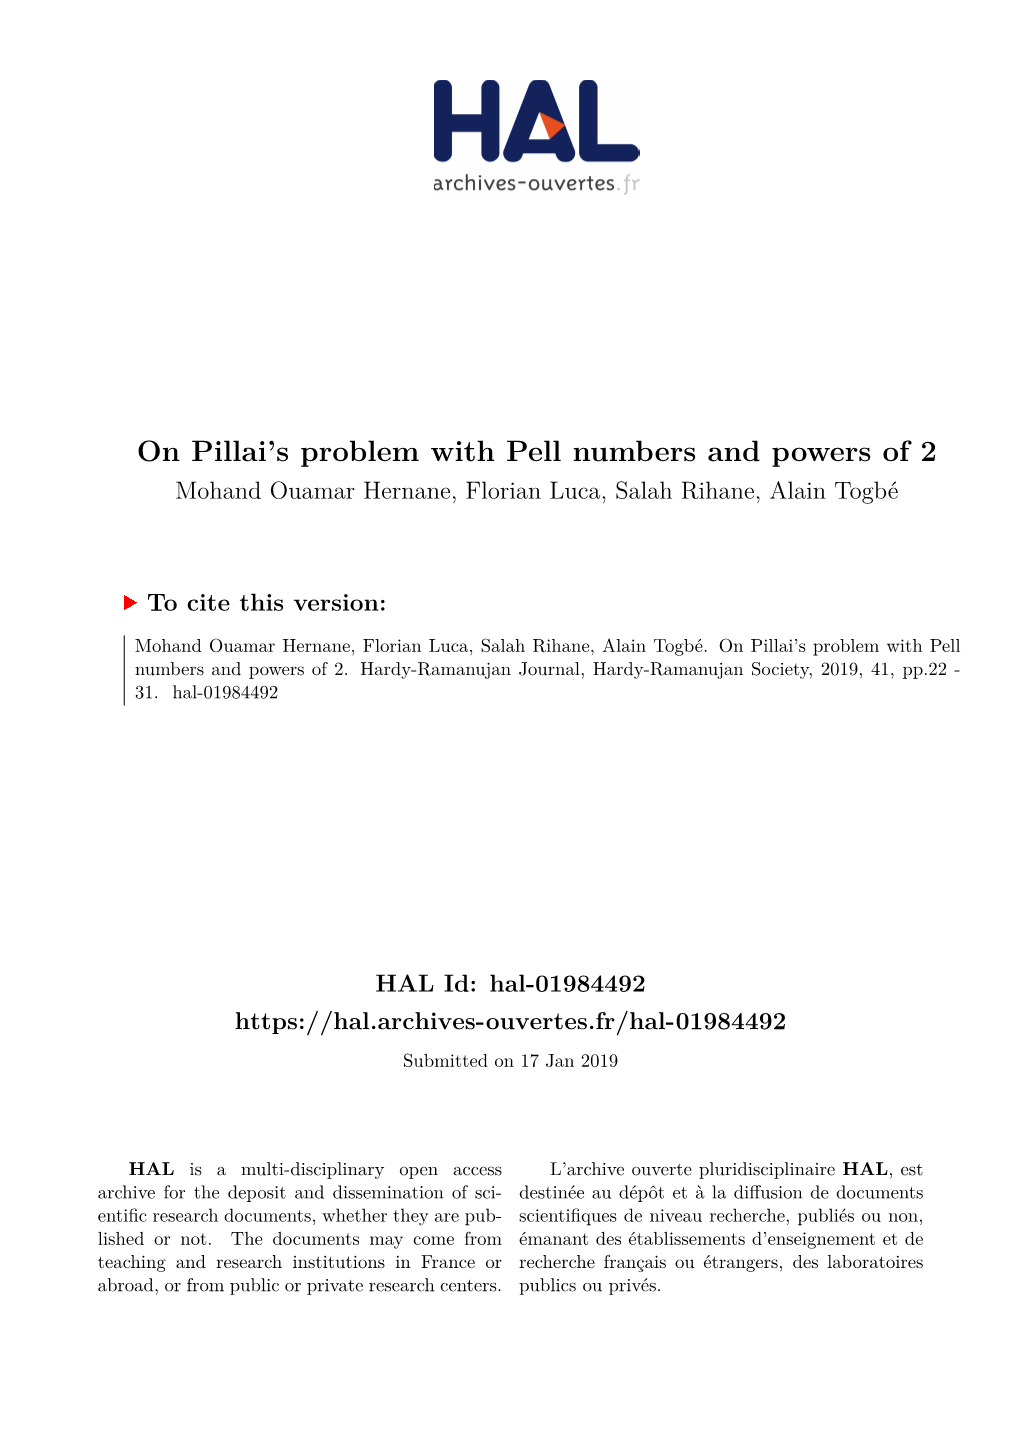 On Pillai's Problem with Pell Numbers and Powers of 2